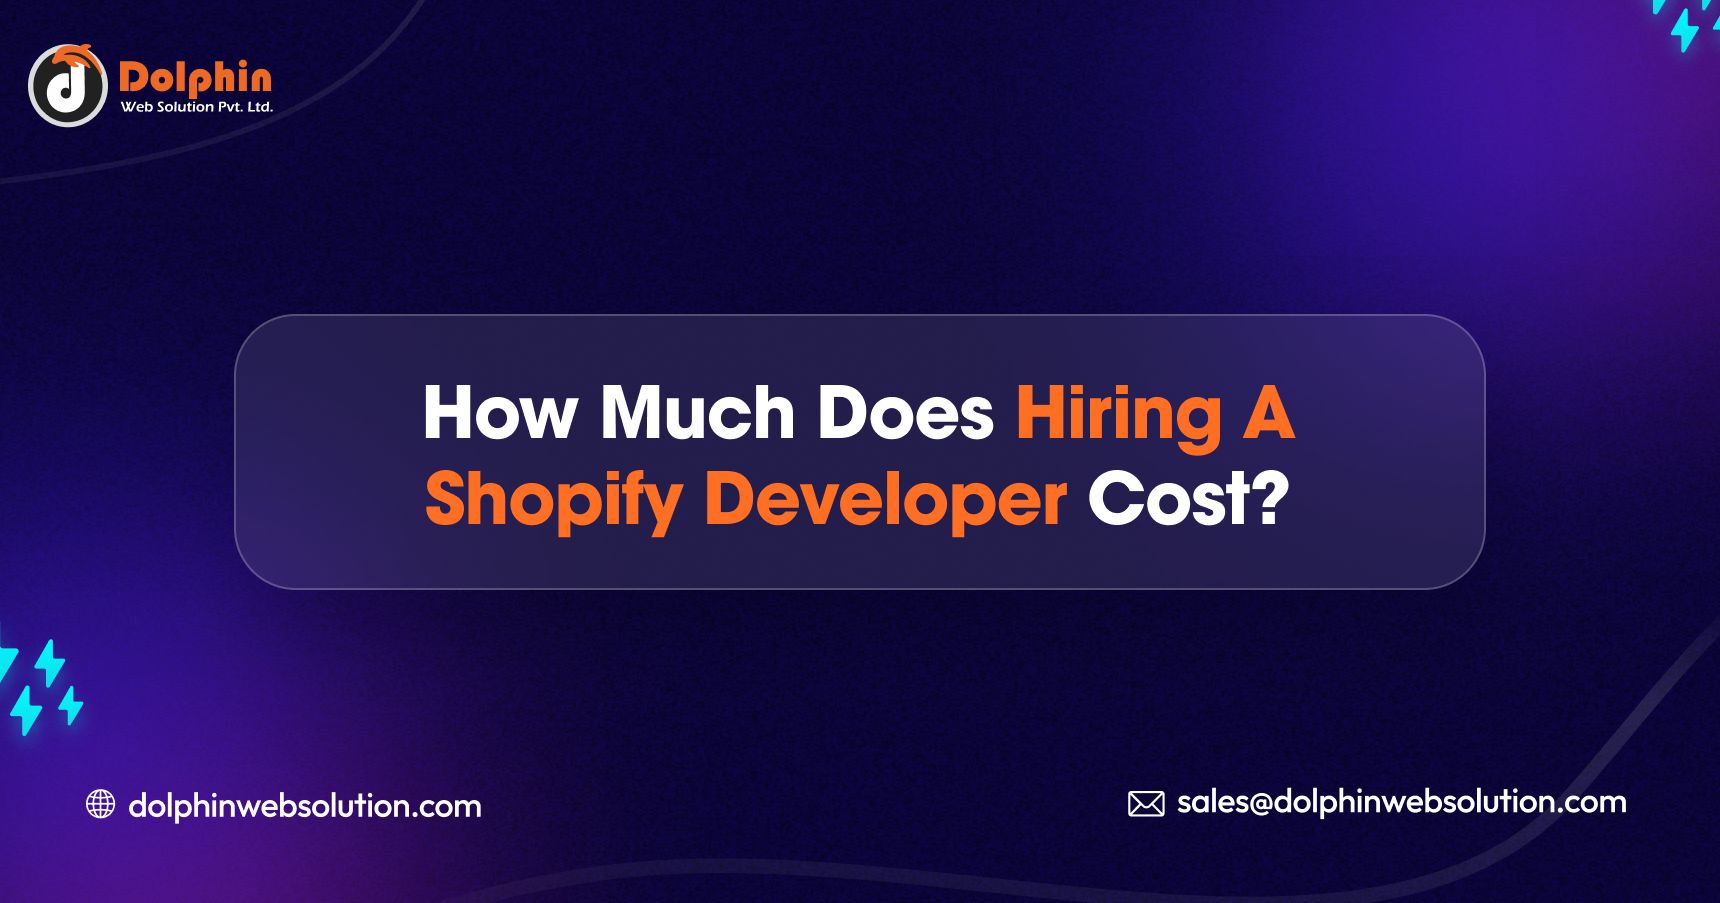 How Much Does It Cost to Hire a Shopify Developer?